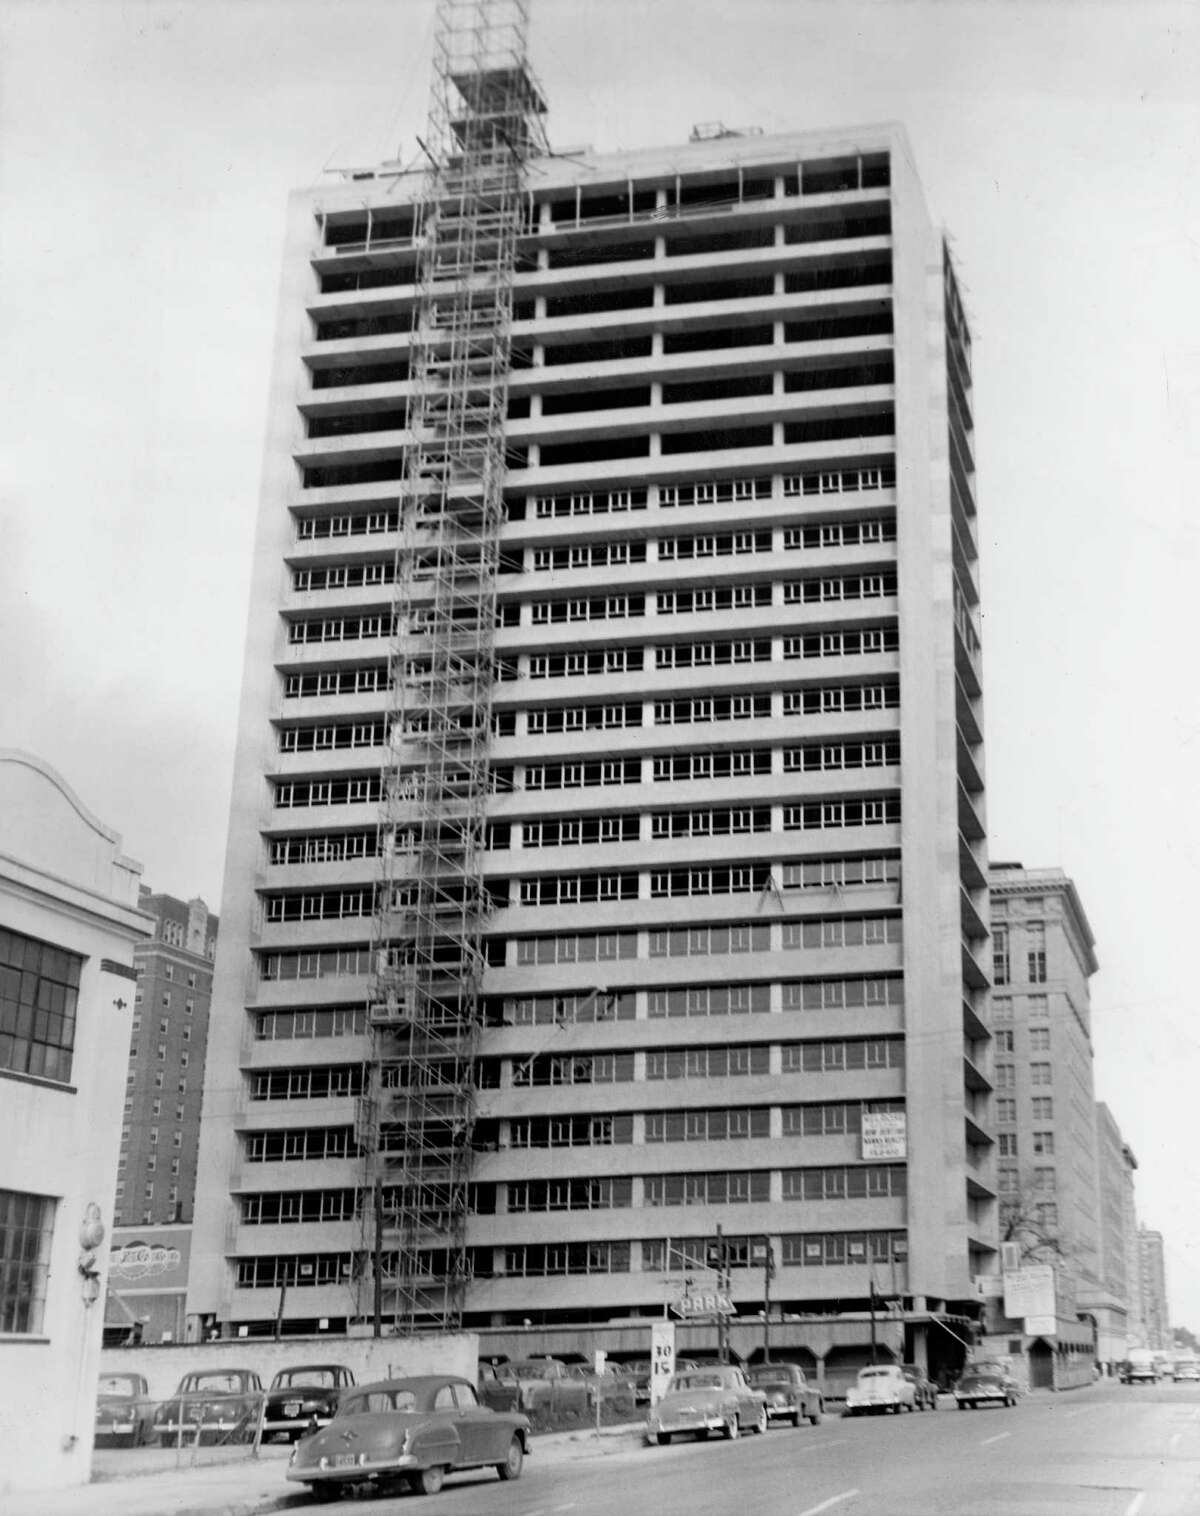 12/1951 - This unconventional skycraper, which at a distance will be silvery in tone, is the nearly completed Melrose Building, being built by Melvin A. Silverman, developer, and his New York associate, Bennett Rose. Tellepsen Construction Company is the contractor. The cost is more than $4,000,000 and completion is scheduled for February.